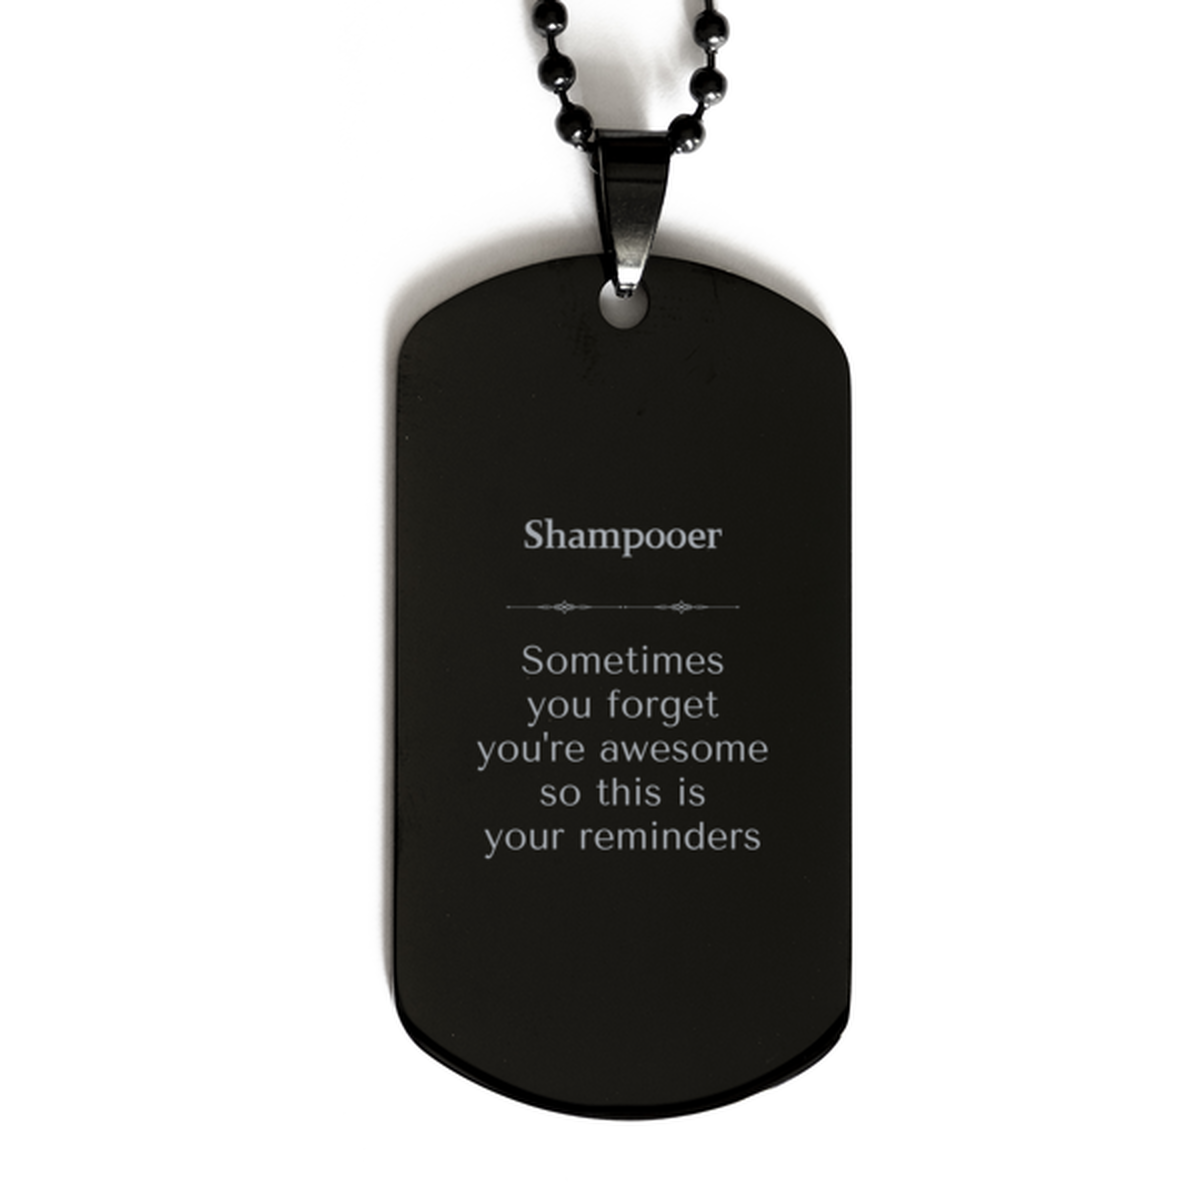 Sentimental Shampooer Black Dog Tag, Shampooer Sometimes you forget you're awesome so this is your reminders, Graduation Christmas Birthday Gifts for Shampooer, Men, Women, Coworkers